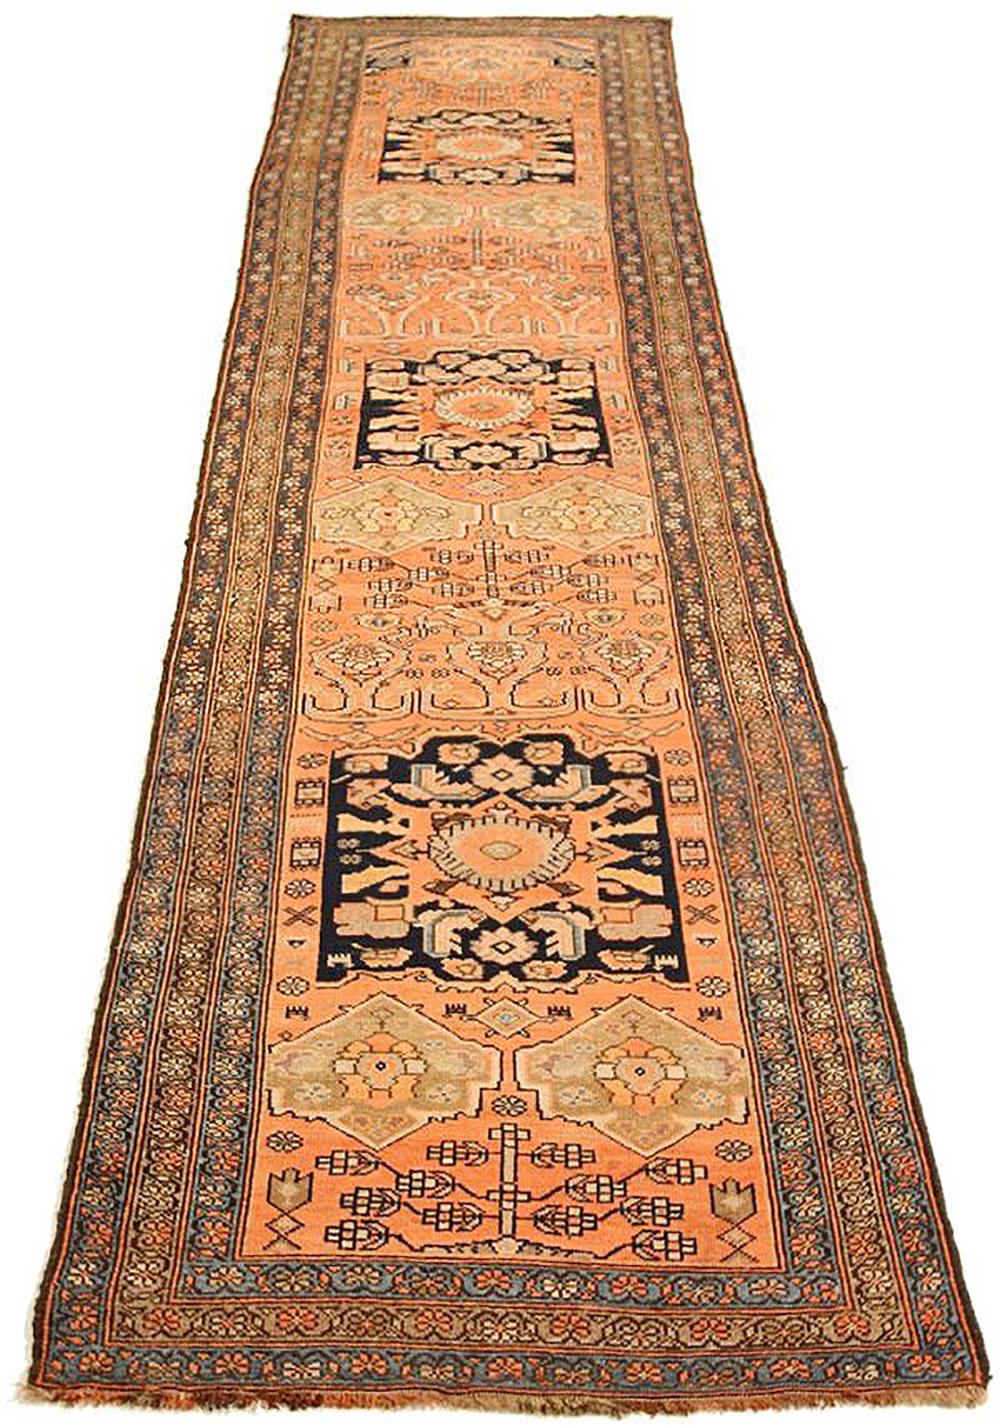 Antique Persian runner rug handwoven from the finest sheep’s wool and colored with all-natural vegetable dyes that are safe for humans and pets. It’s a traditional Malayer design featuring a beautiful combination of geometric details in black and